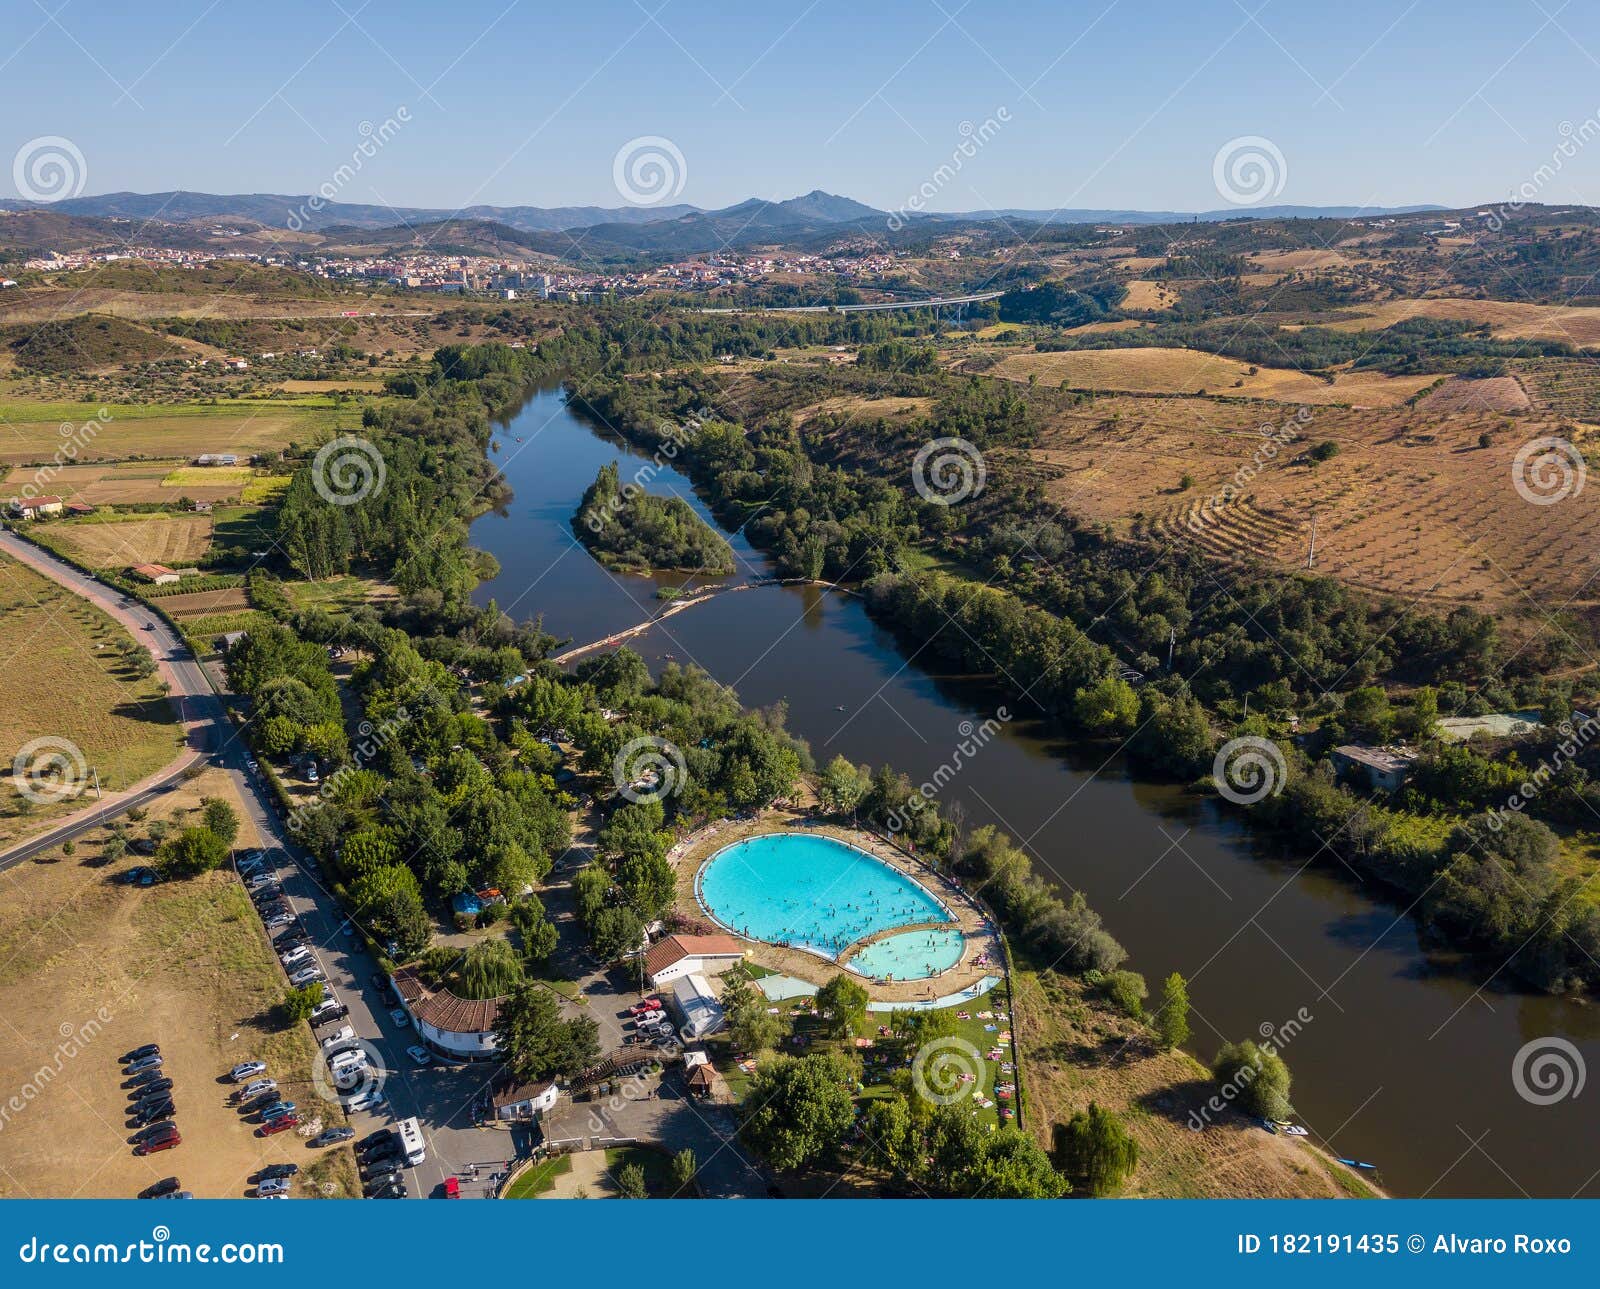 happy people swimming on vacation. aerial view over amazing pool. drone point of view in summer landscape. swimming pool in mirand